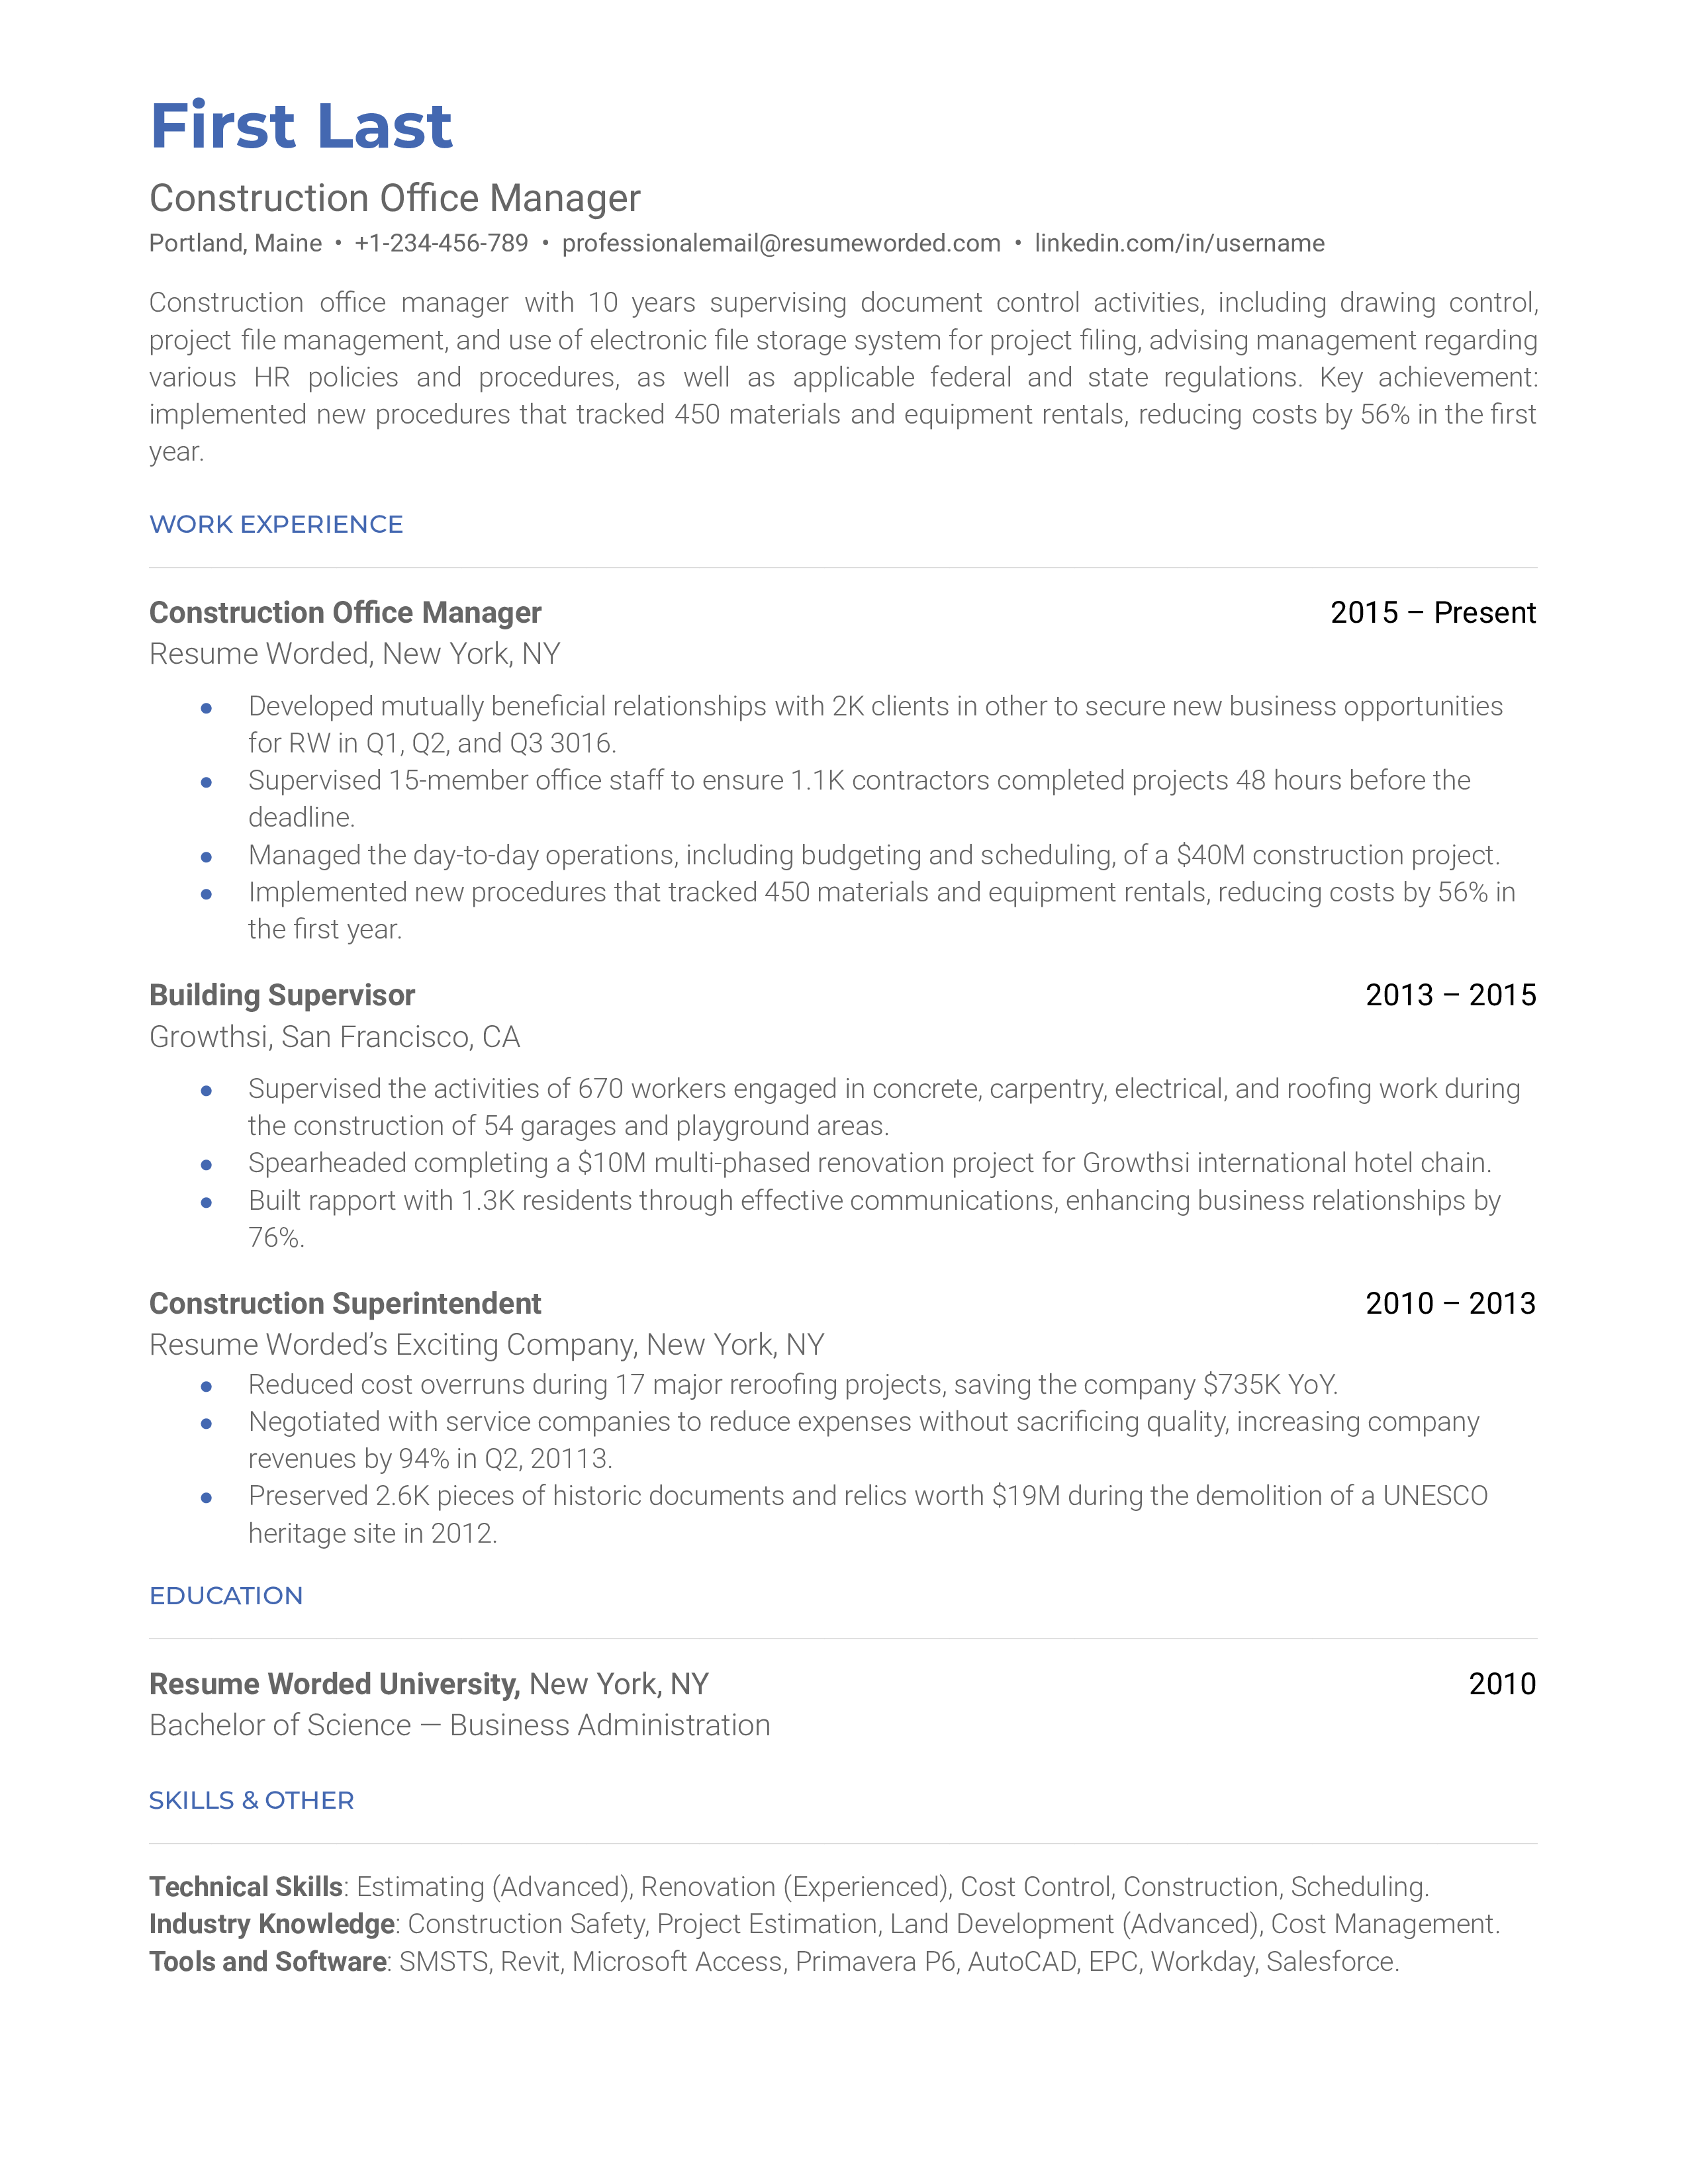 A CV for a Construction Office Manager showcasing software knowledge and understanding of construction processes.